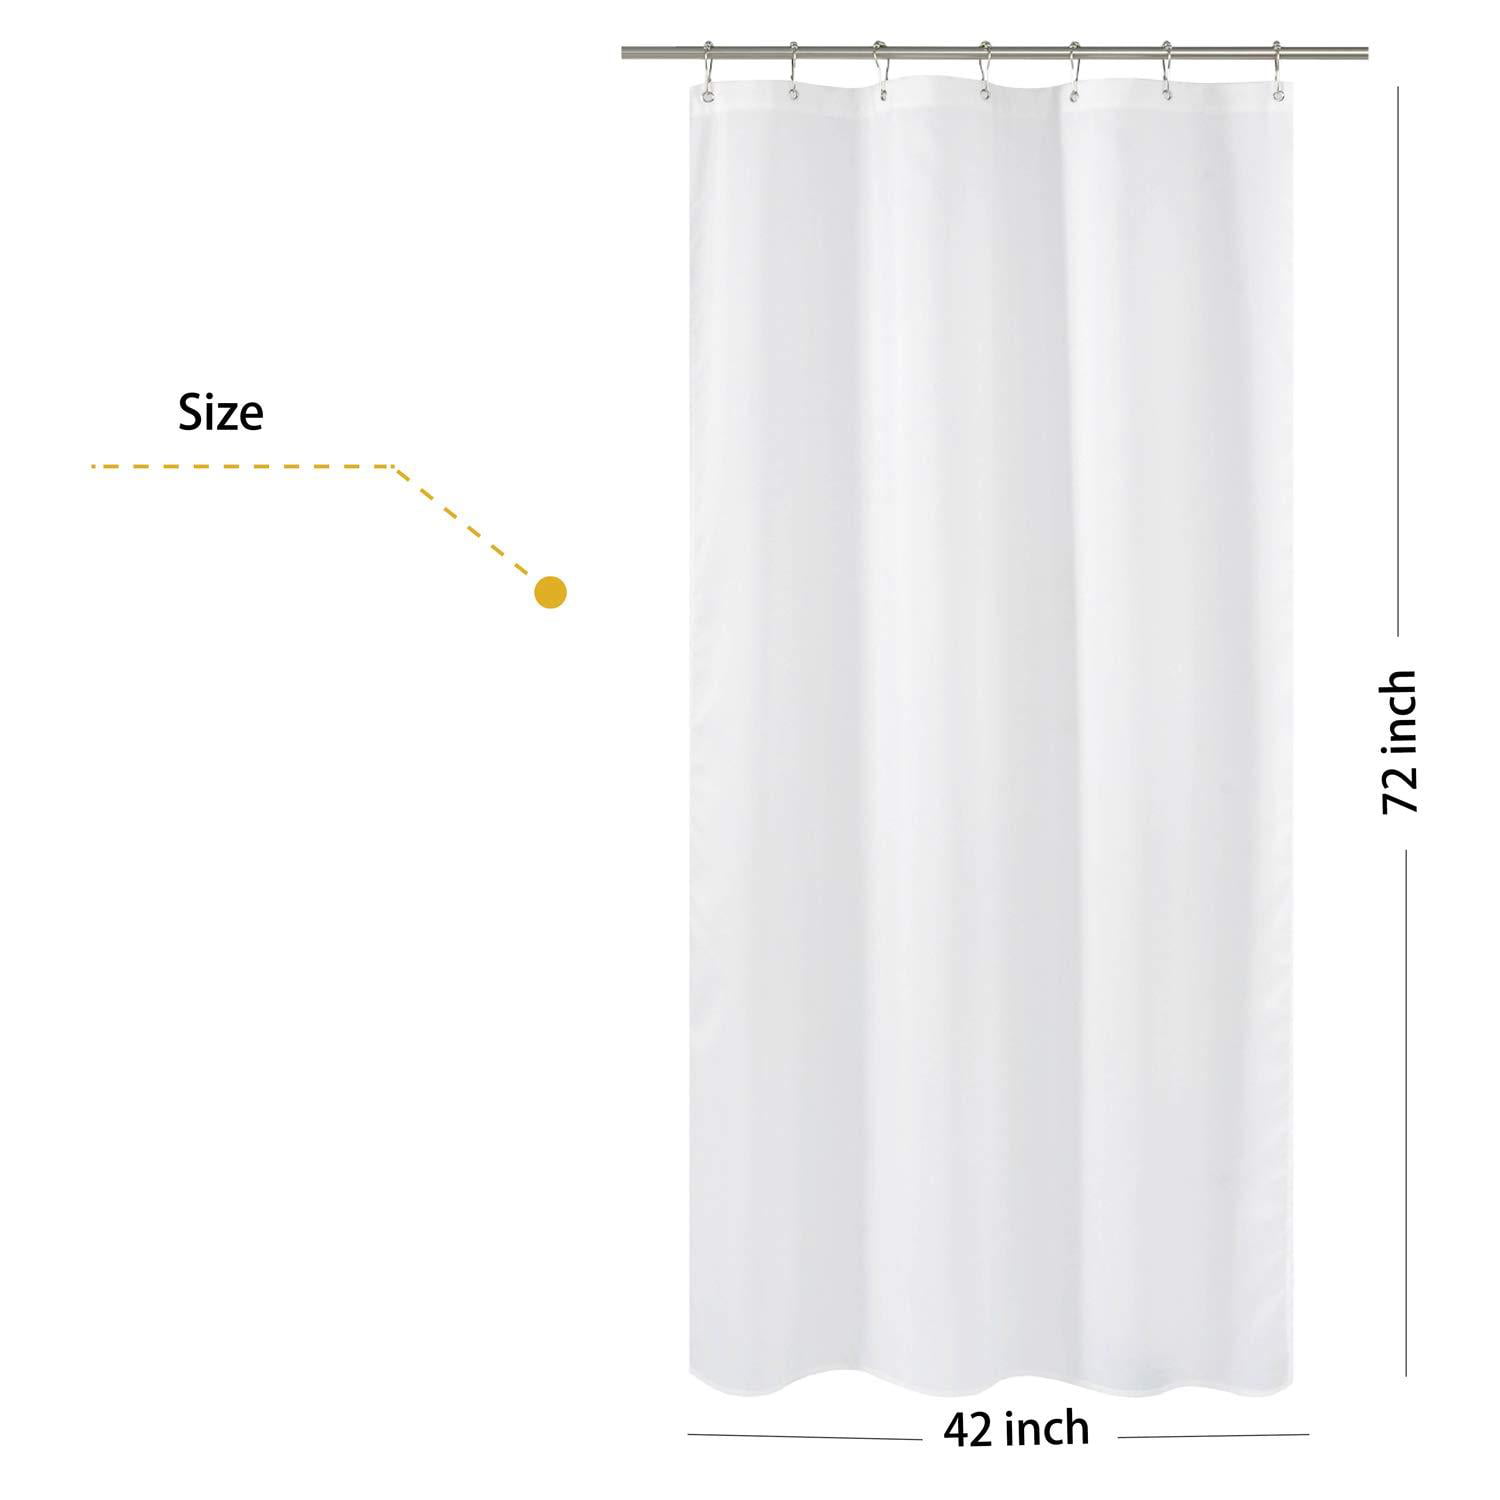 Fabric Shower Curtain Liner Stall Size, 76 Inch Long Shower Curtain